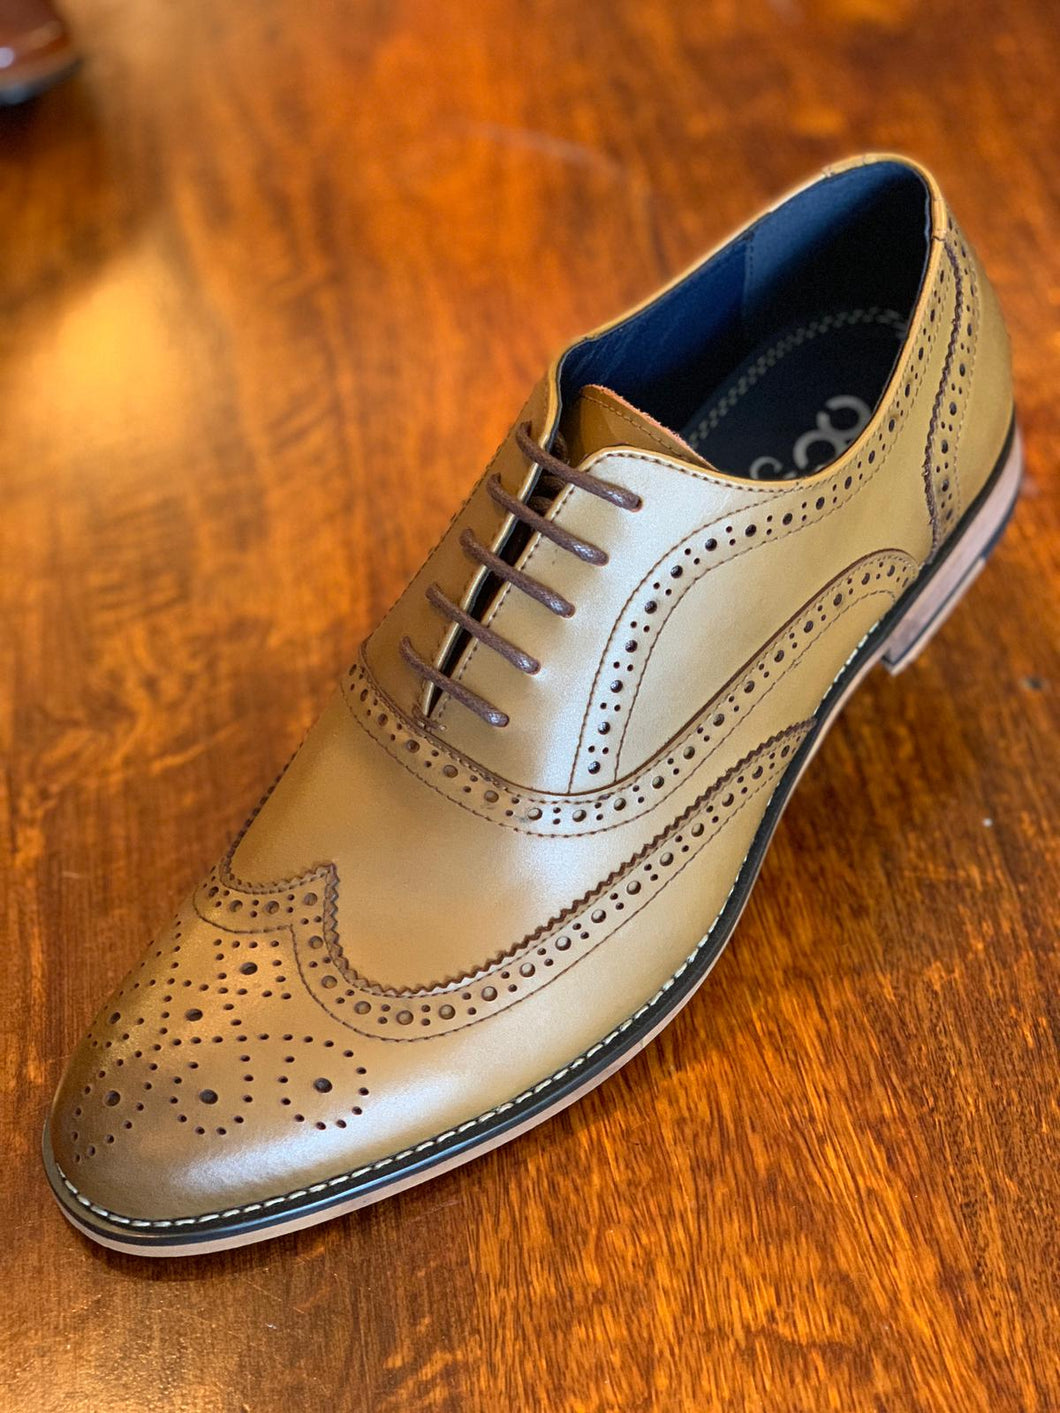 Classic Oxford Tan Brogue. Perfect footwear for a suit or jeans